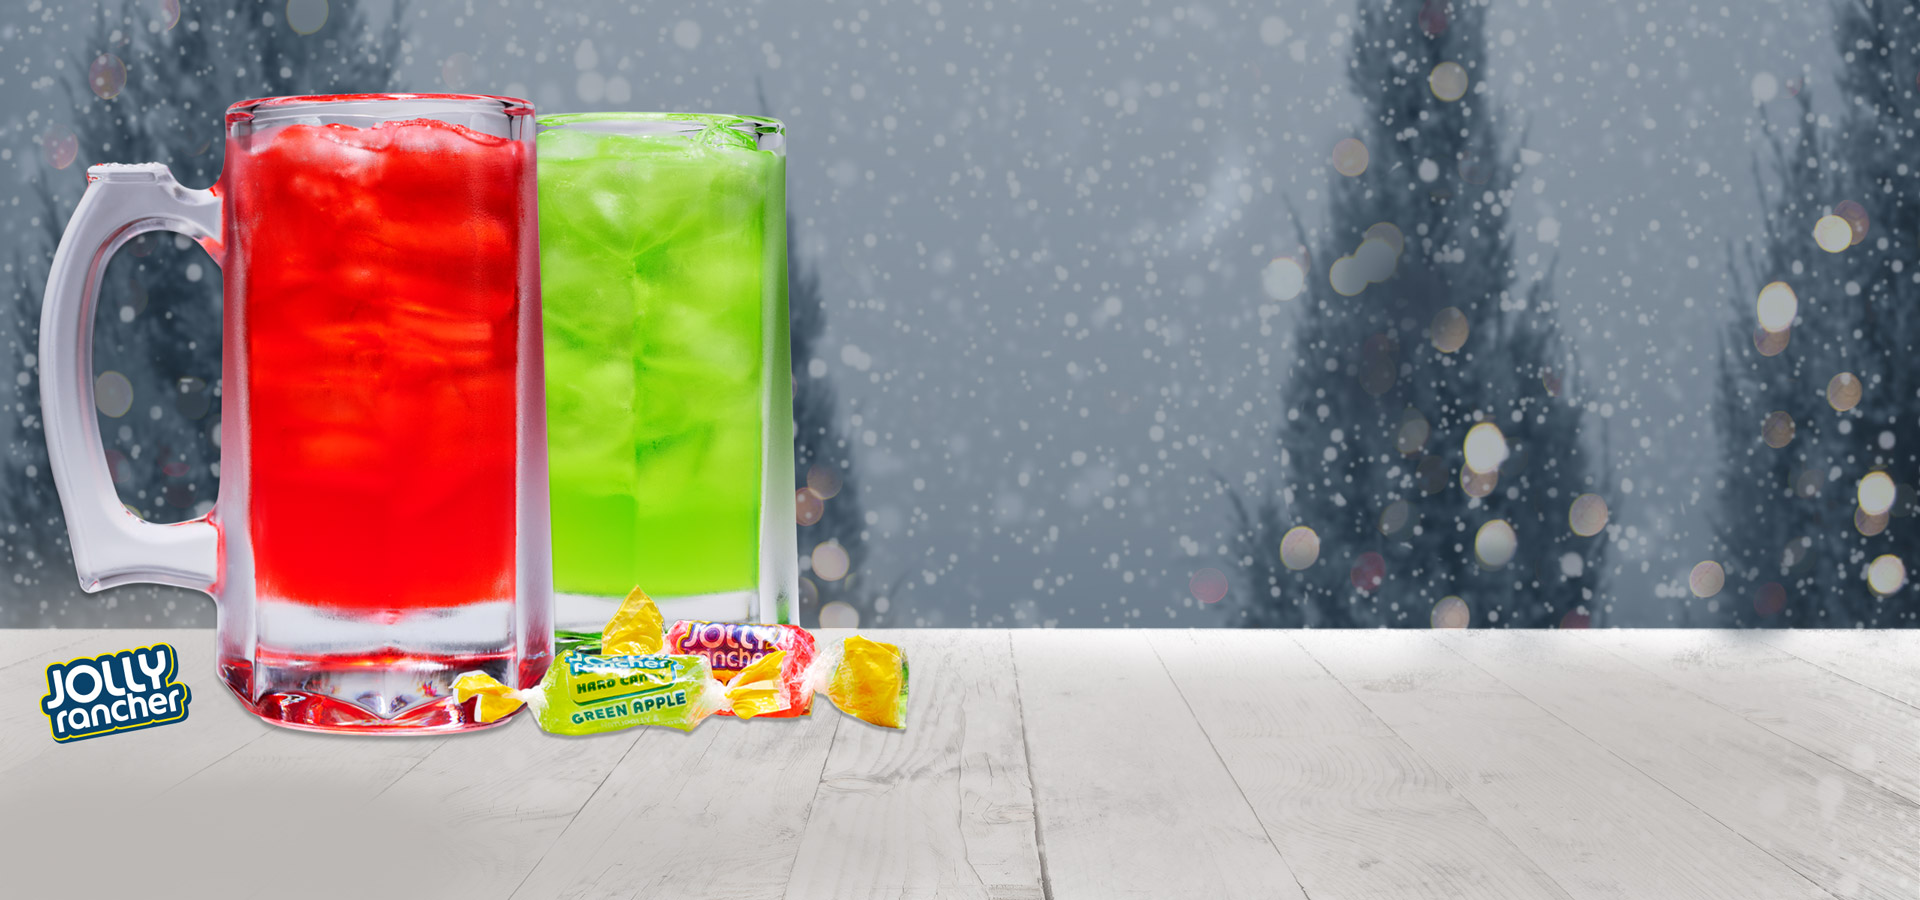 Applebee’s Dollar Jolly Drink is the Holiday Drink of the Month